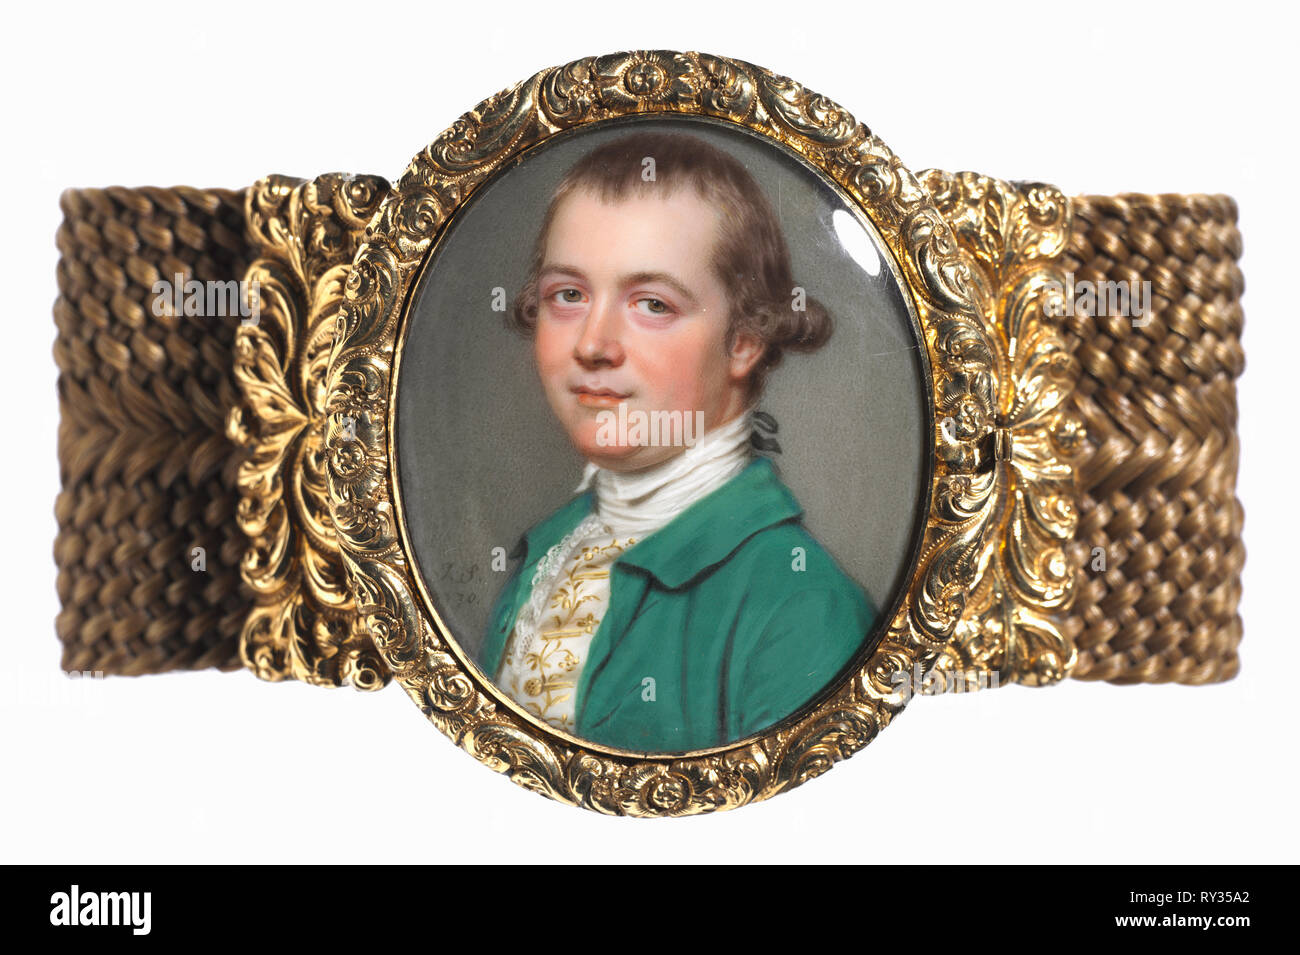 Portrait of Constantine Phipps, 1770. John I Smart (British, 1741-1811). Watercolor on ivory in a later gold and woven hair bracelet; framed: 4.6 x 4.1 cm (1 13/16 x 1 5/8 in.); unframed: 3.8 x 3.2 cm (1 1/2 x 1 1/4 in Stock Photo